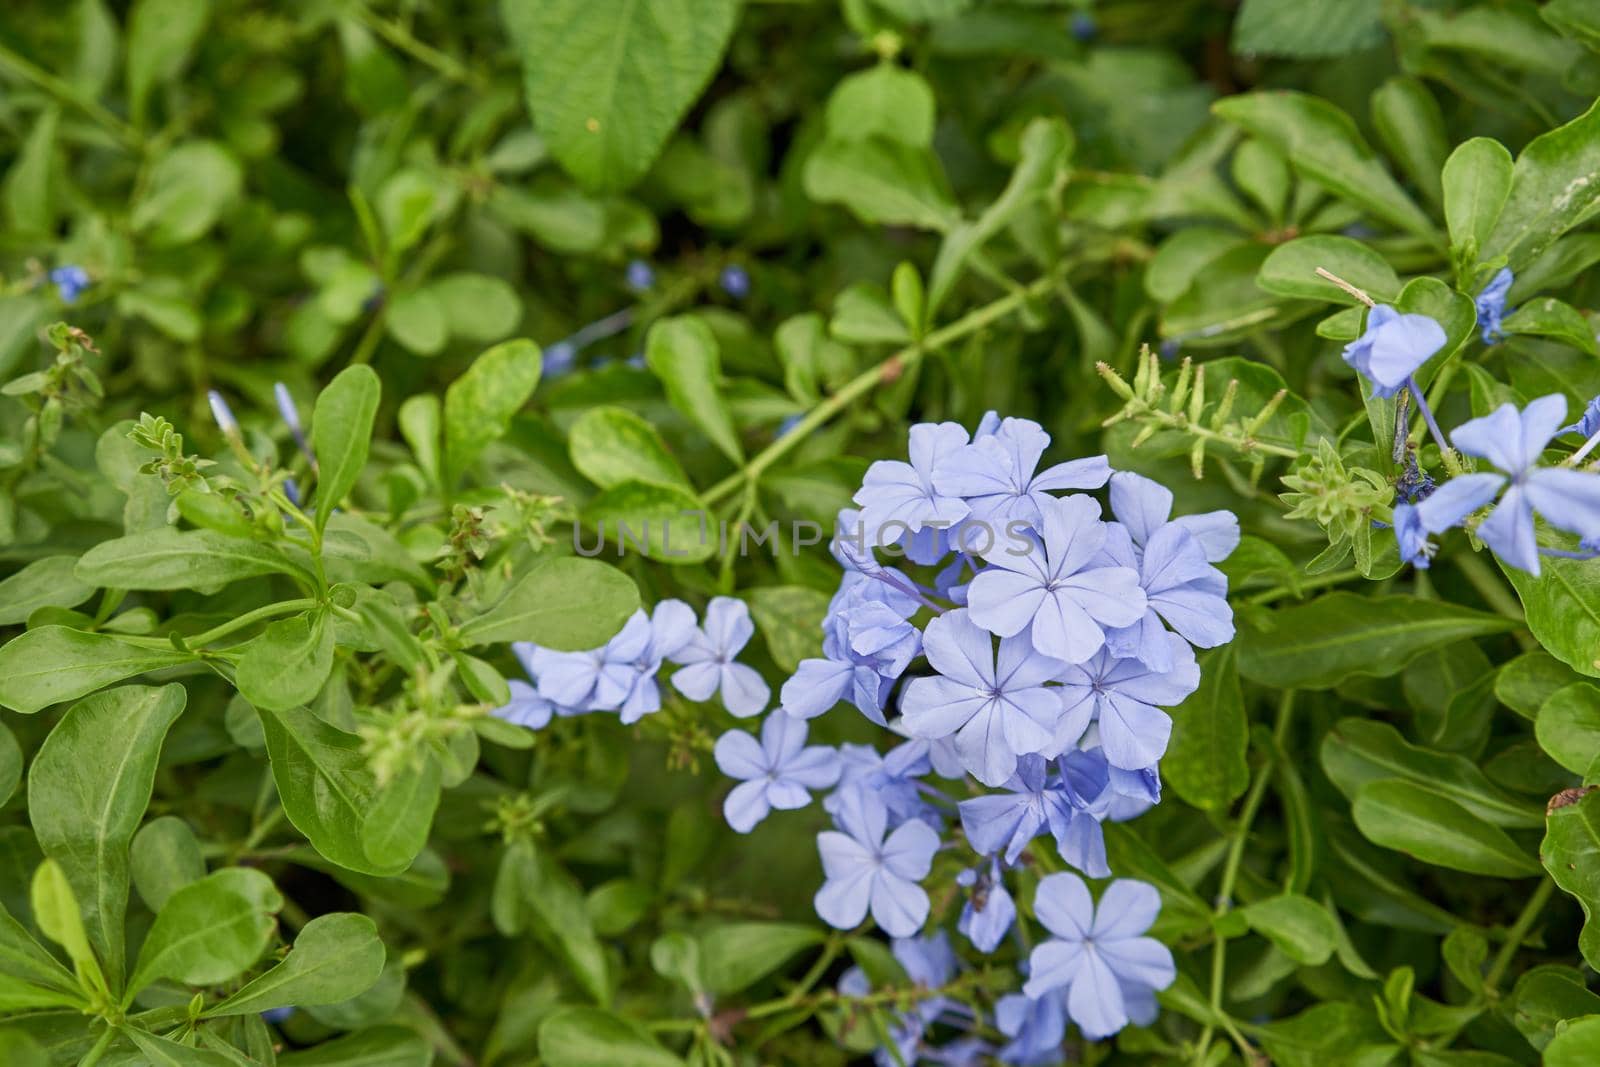 Plumbago auriculata, the cape leadwort, blue plumbago or Cape plumbago is a species of flowering plant in the family Plumbaginaceae at outdoor garden have green leave as background.